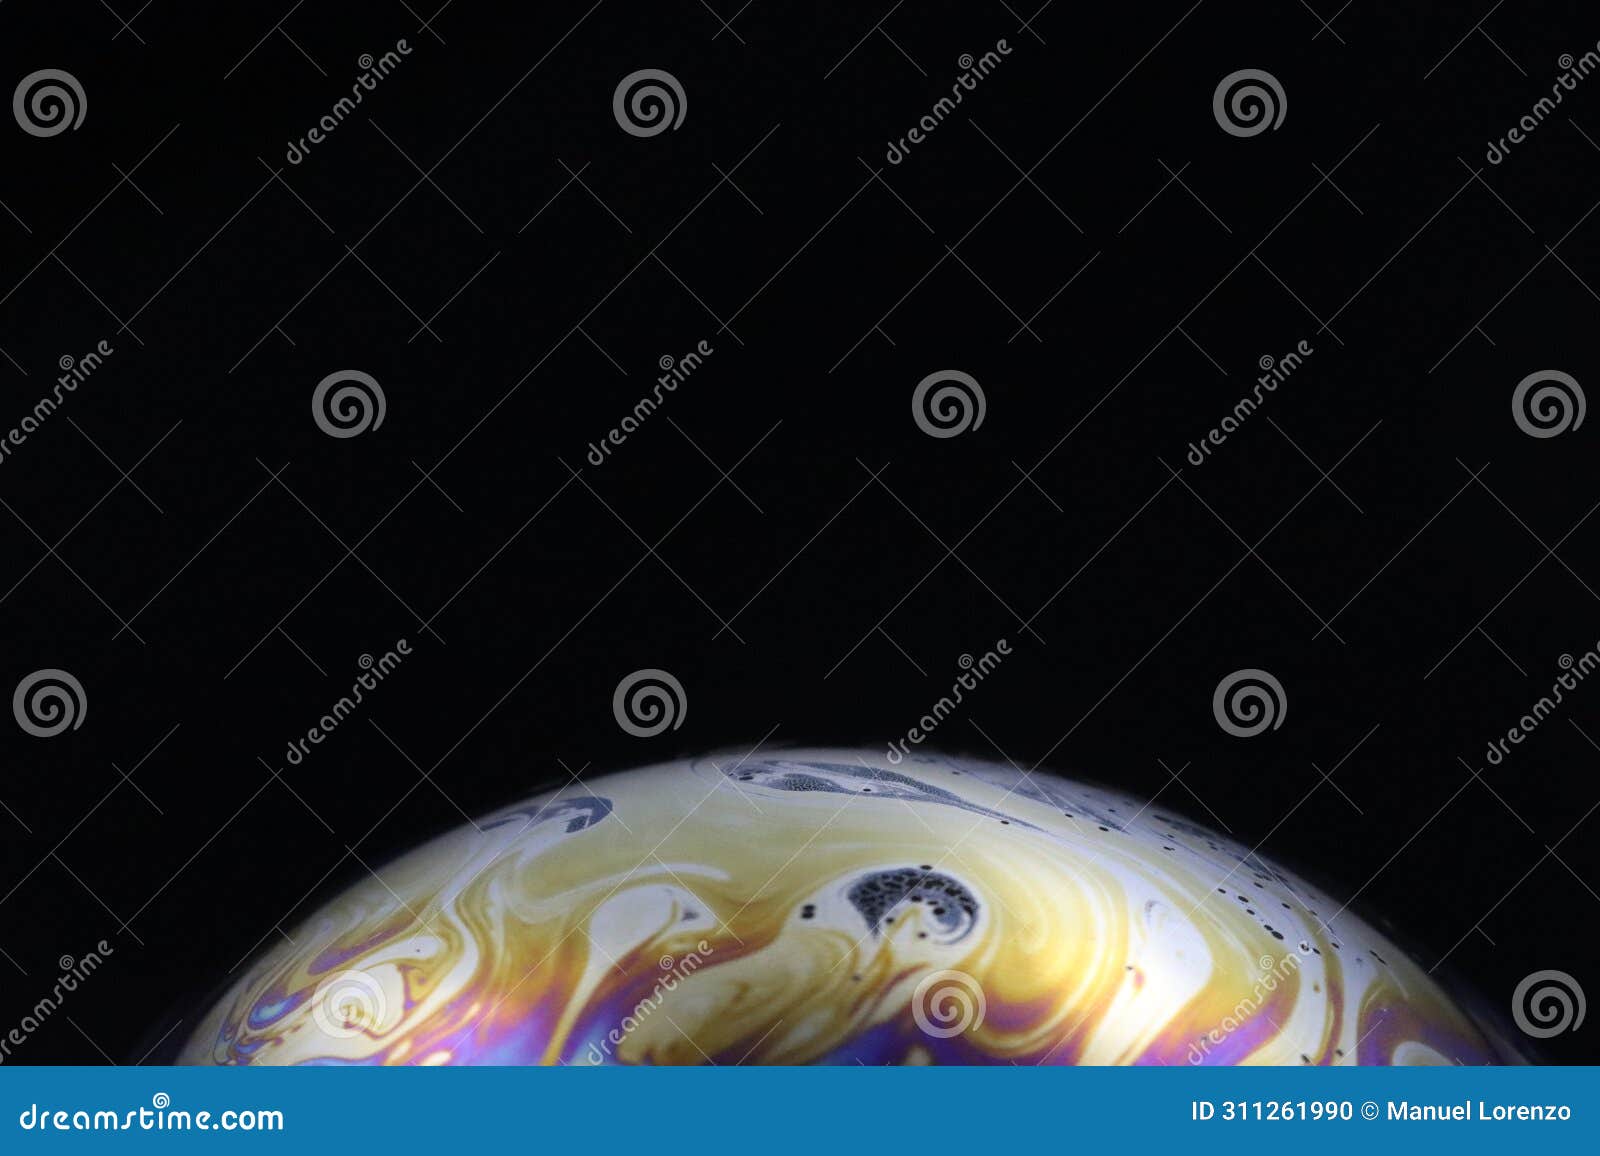 beautiful artificial planet pomp soap different rare spectacular amazing galaxy